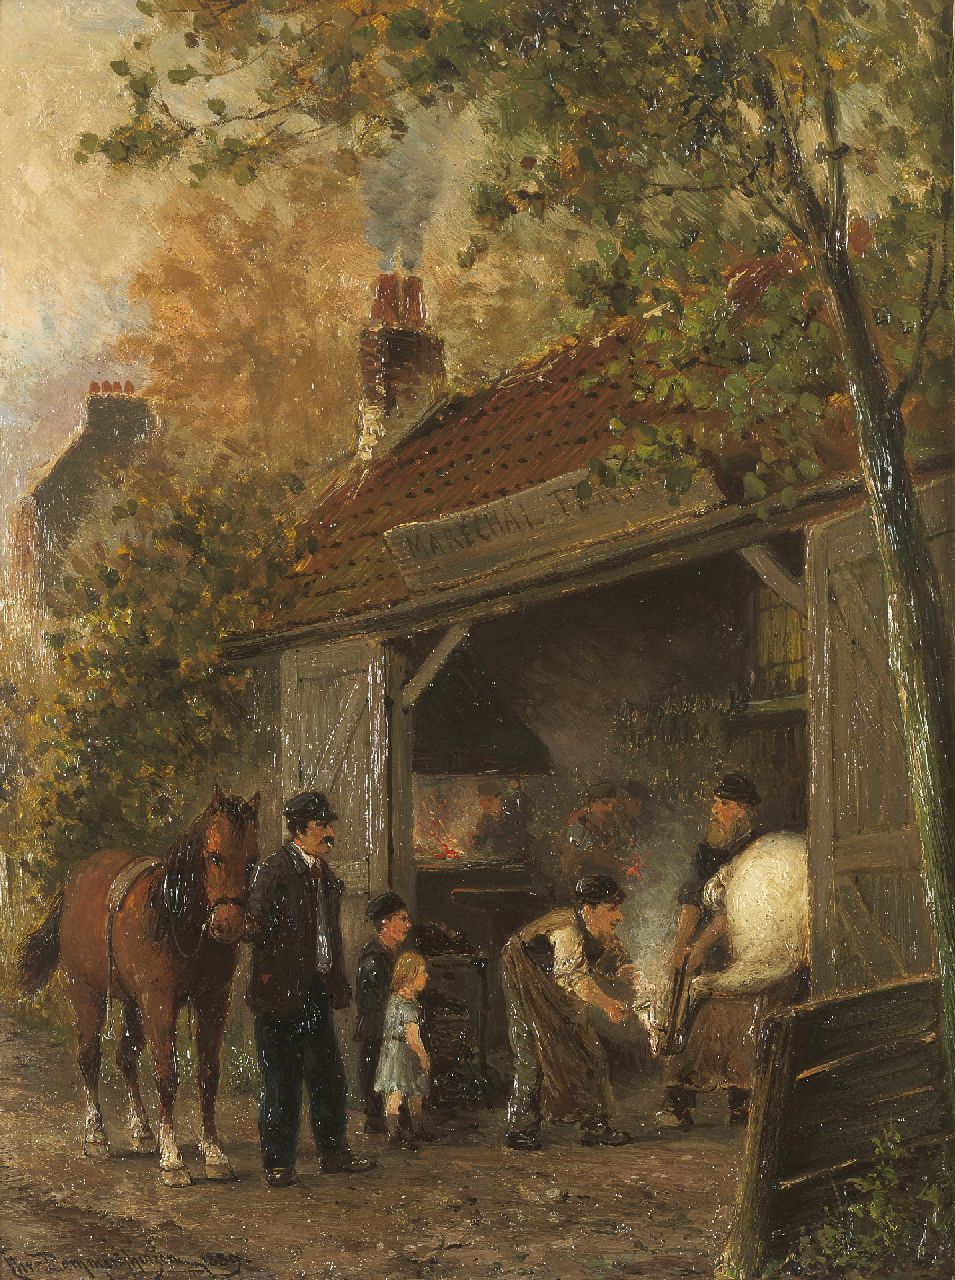 Dommelshuizen C.C.  | Cornelis Christiaan Dommelshuizen, At the blacksmith, oil on panel 34.9 x 26.4 cm, signed l.l. and dated 1889